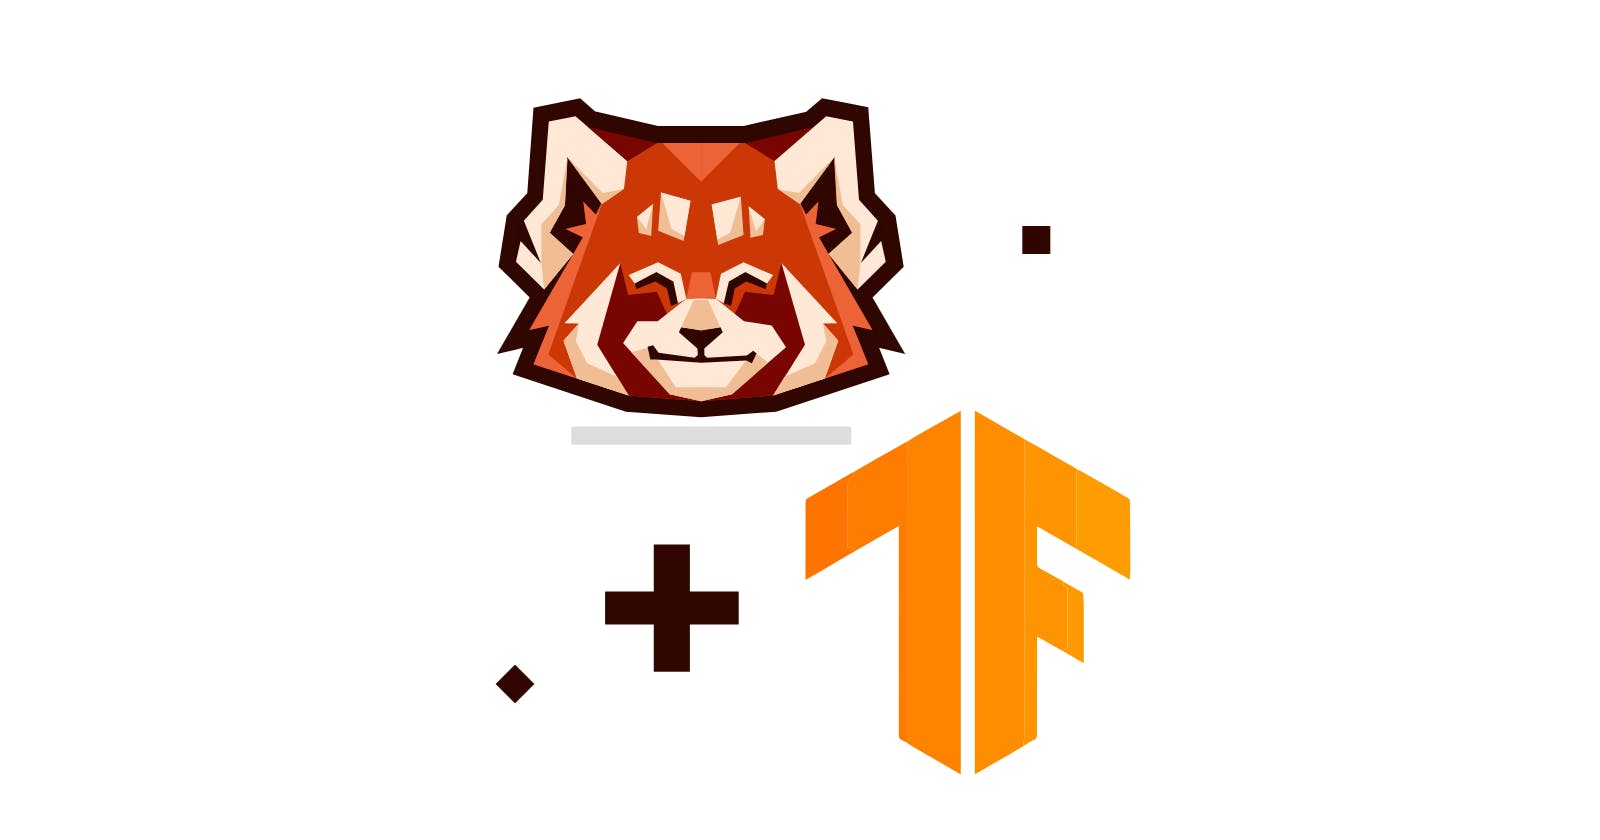 How to use TensorFlow with Redpanda for real-time machine learning